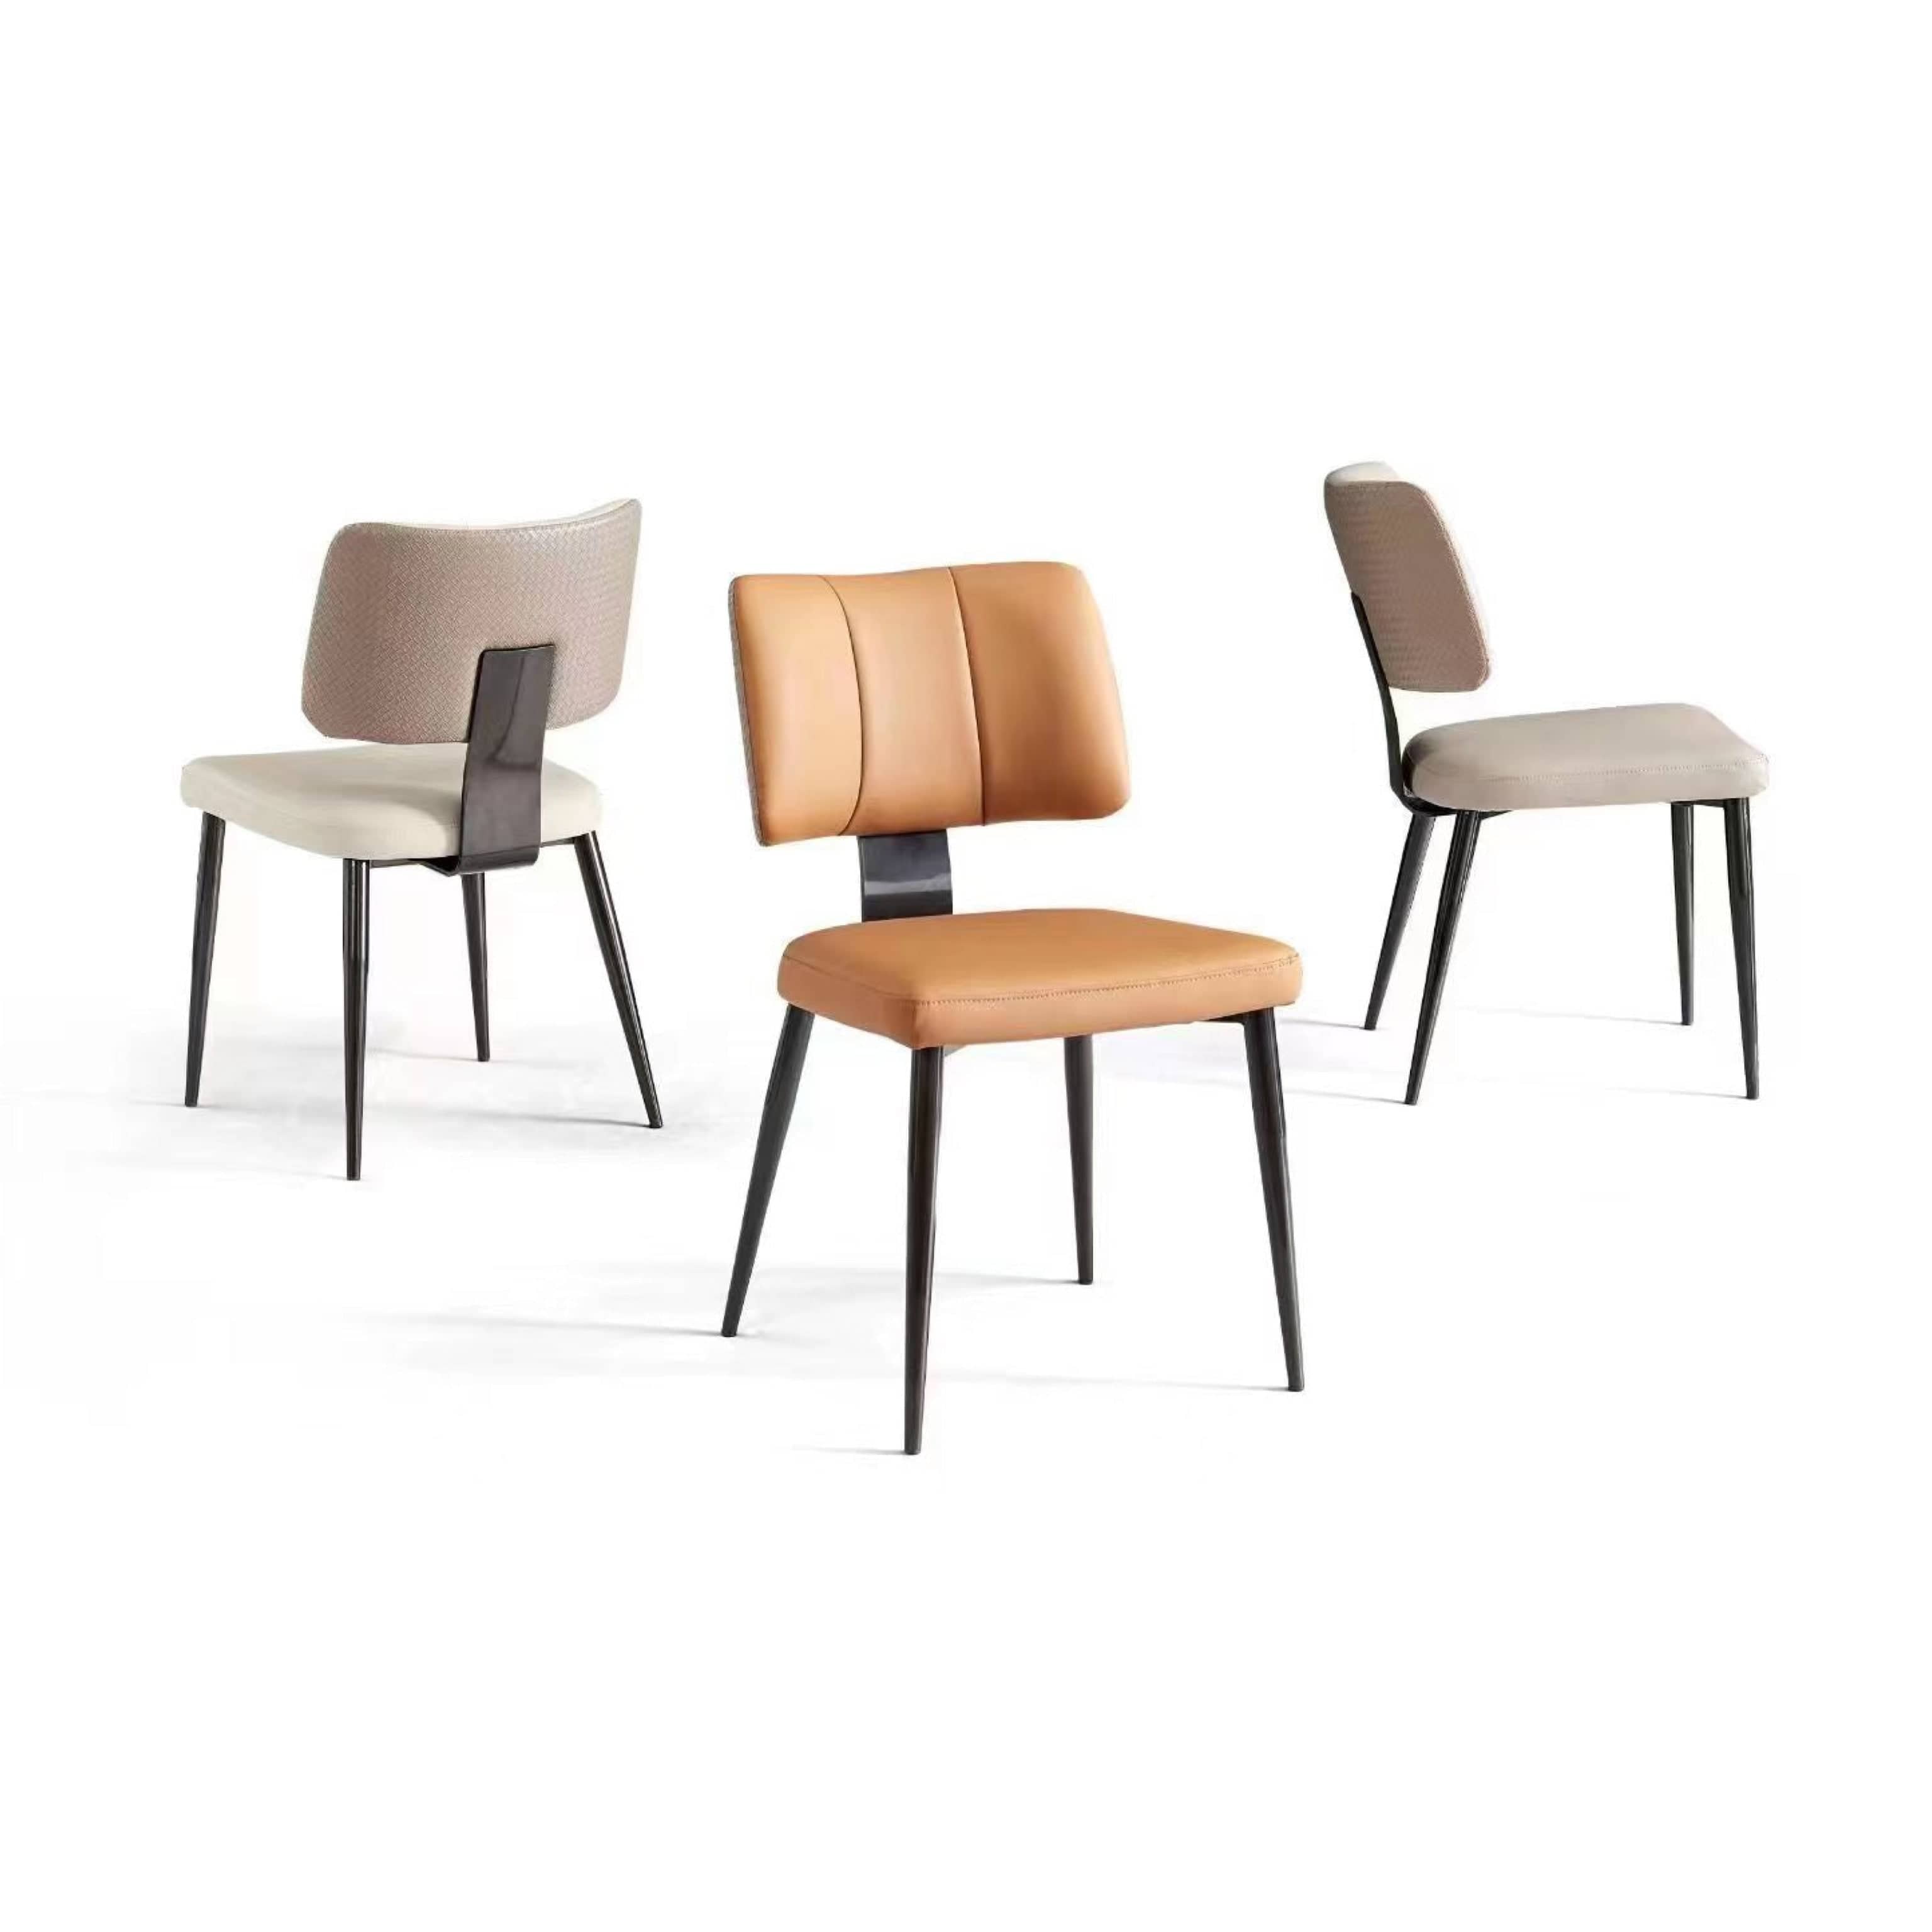 Cletus Dining Chair Casa Concetto Singapore